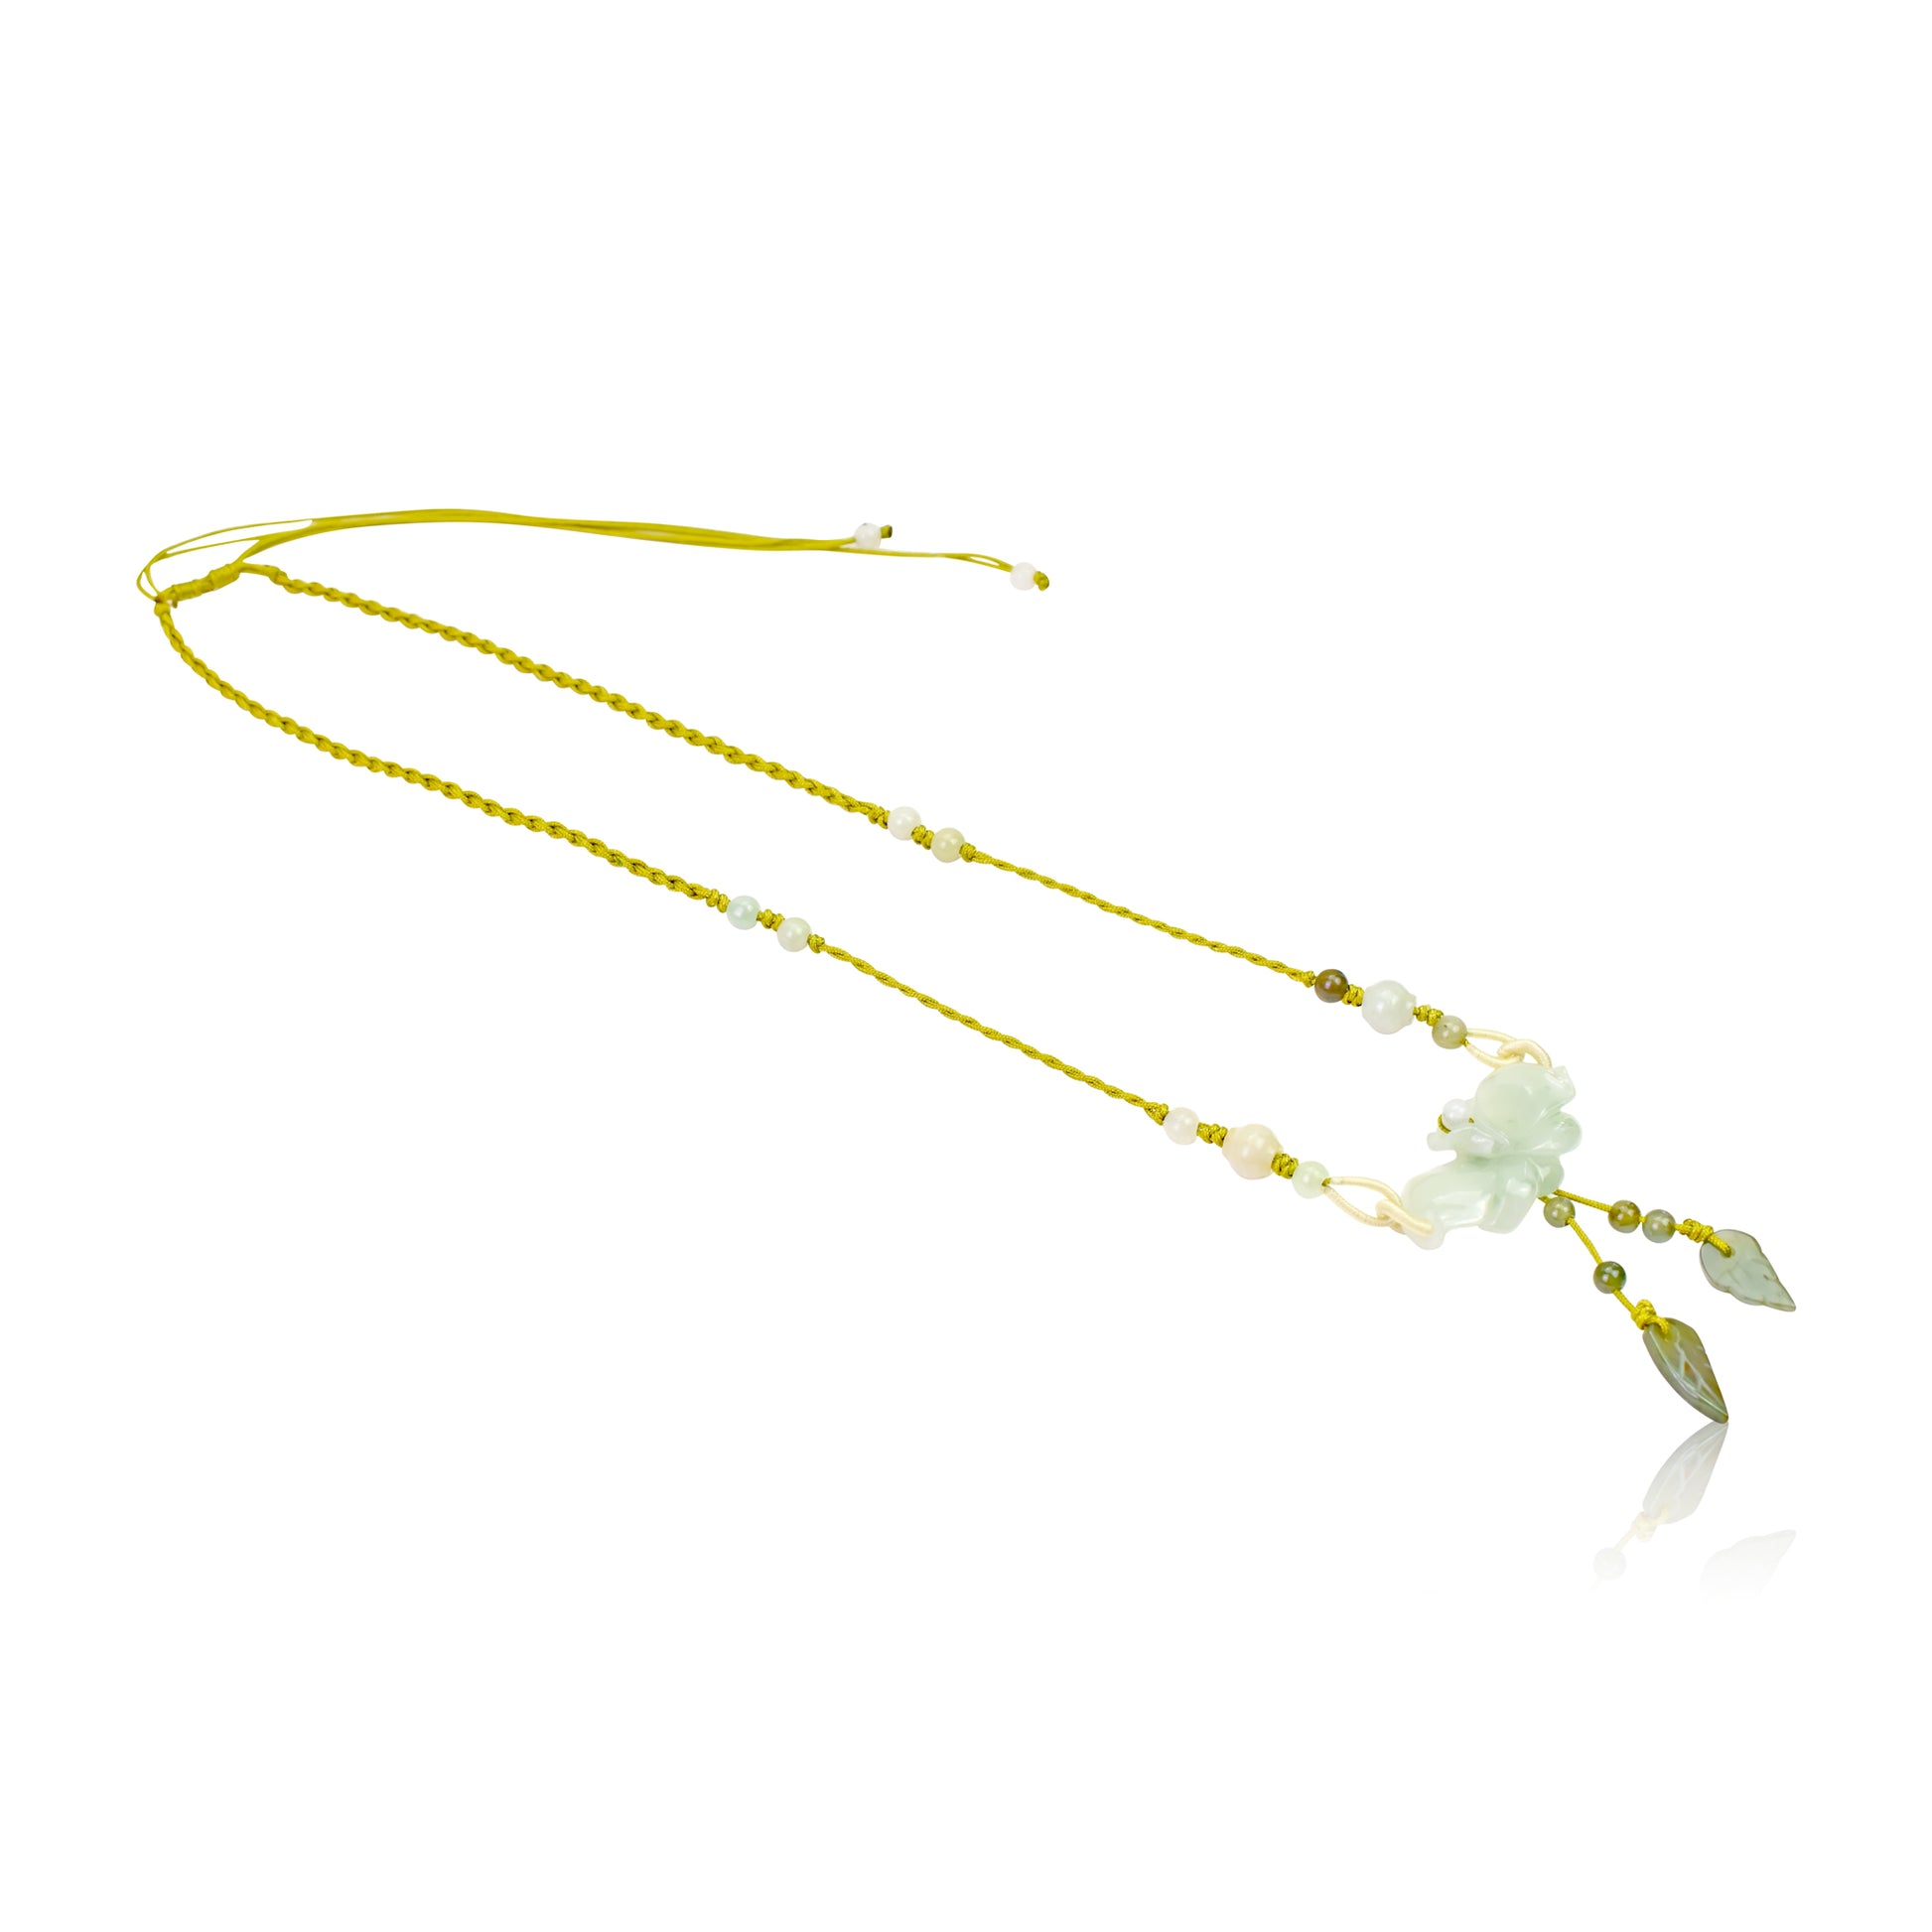 Look Refresh with the Butterfly Orchid Jade Necklace made with Yellow Cord